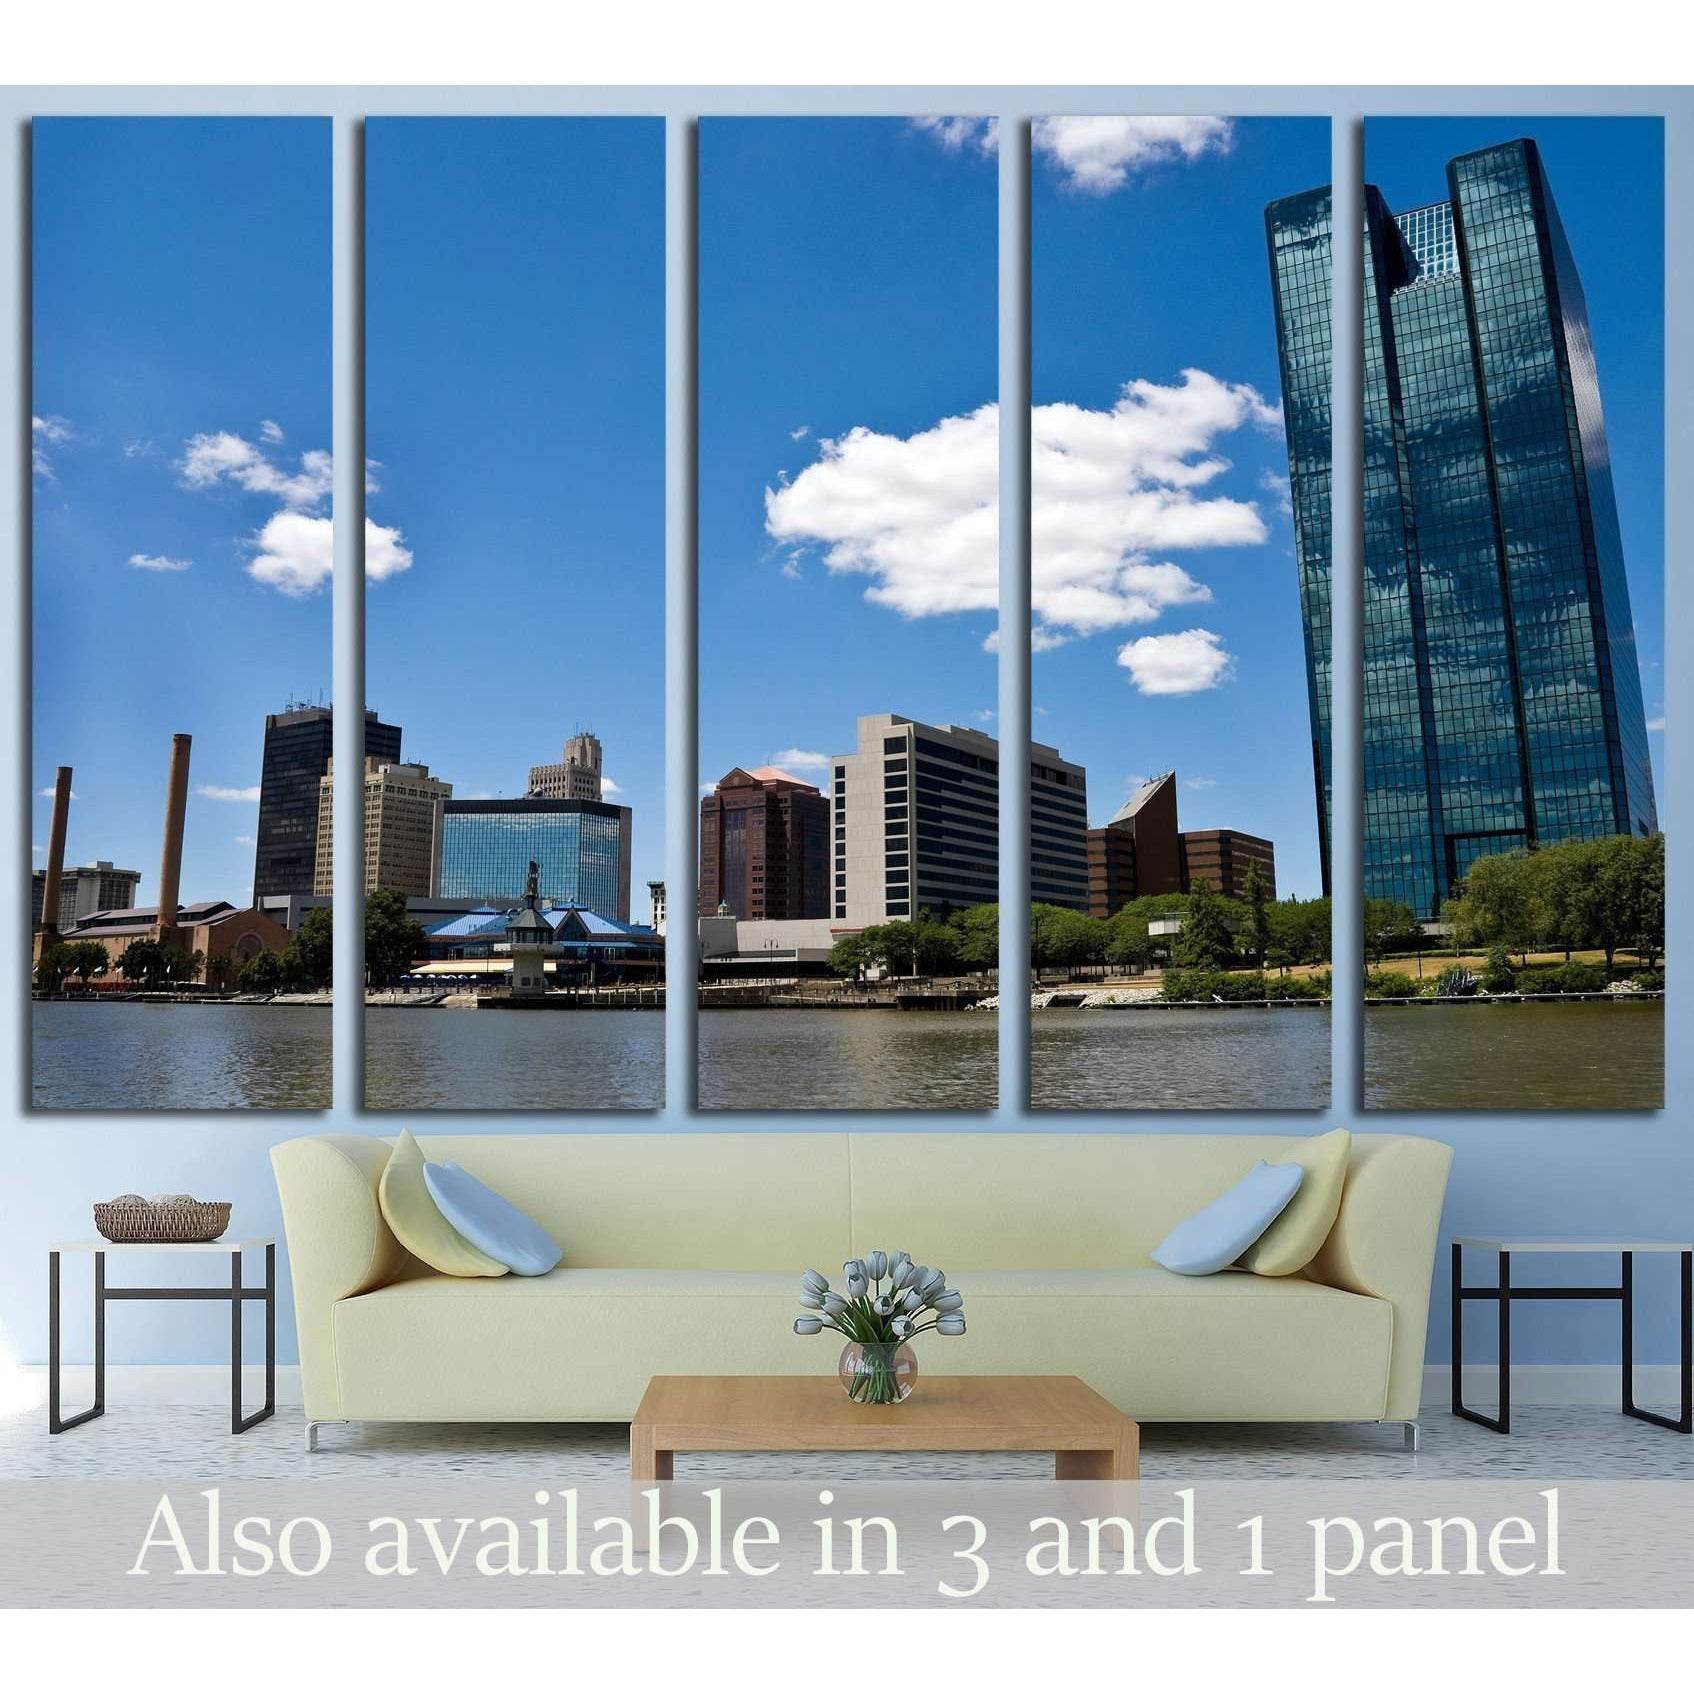 Toledo, OH Skyline from a Boat on the Maumee River №1736 Ready to Hang Canvas Print